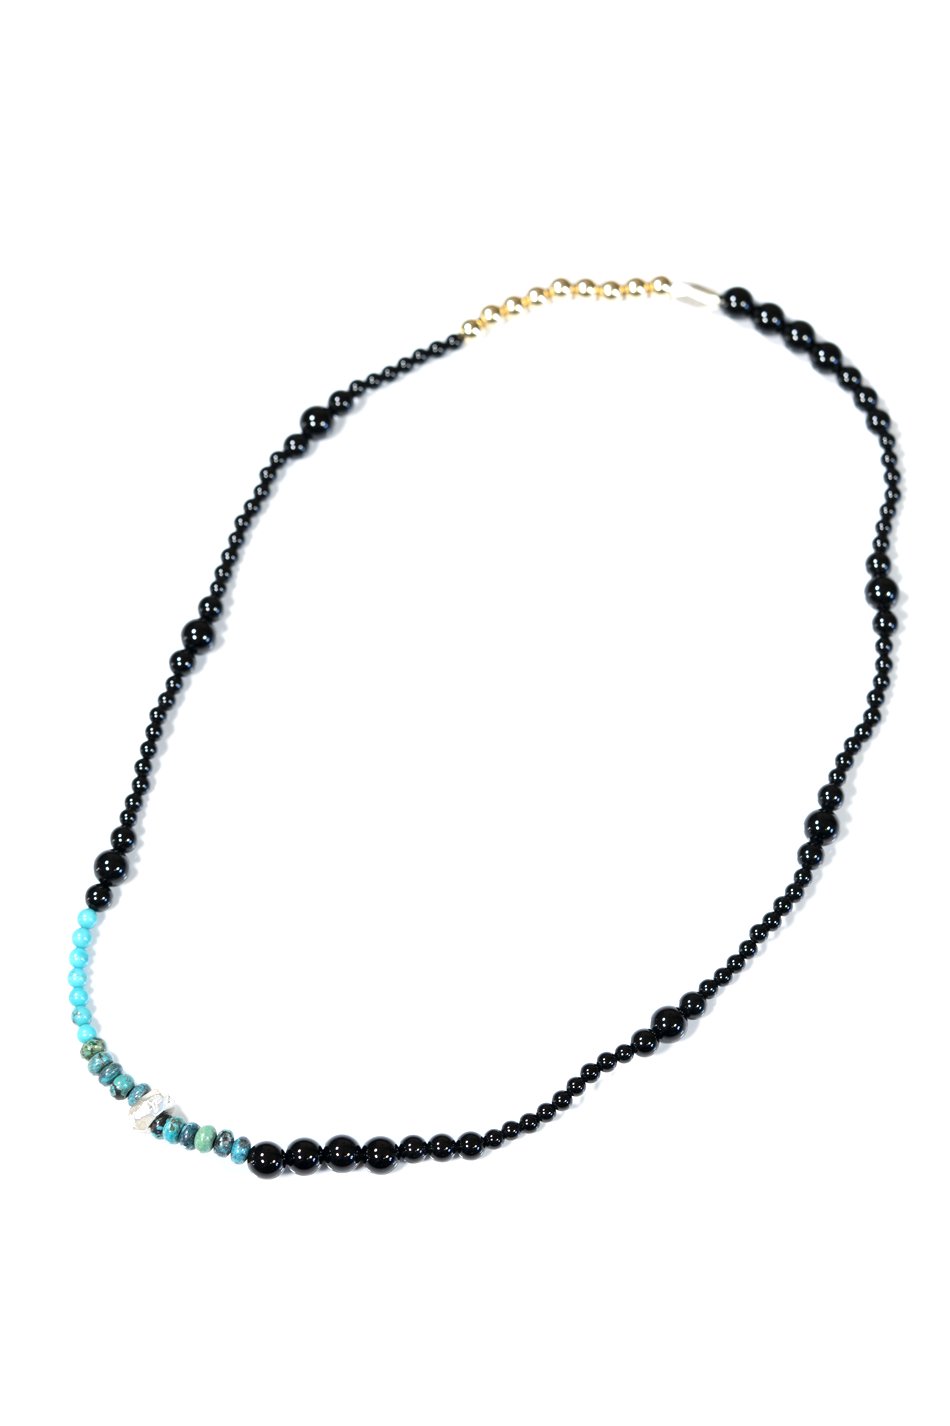 Cut Beads Stretch Necklace /14KGFLD